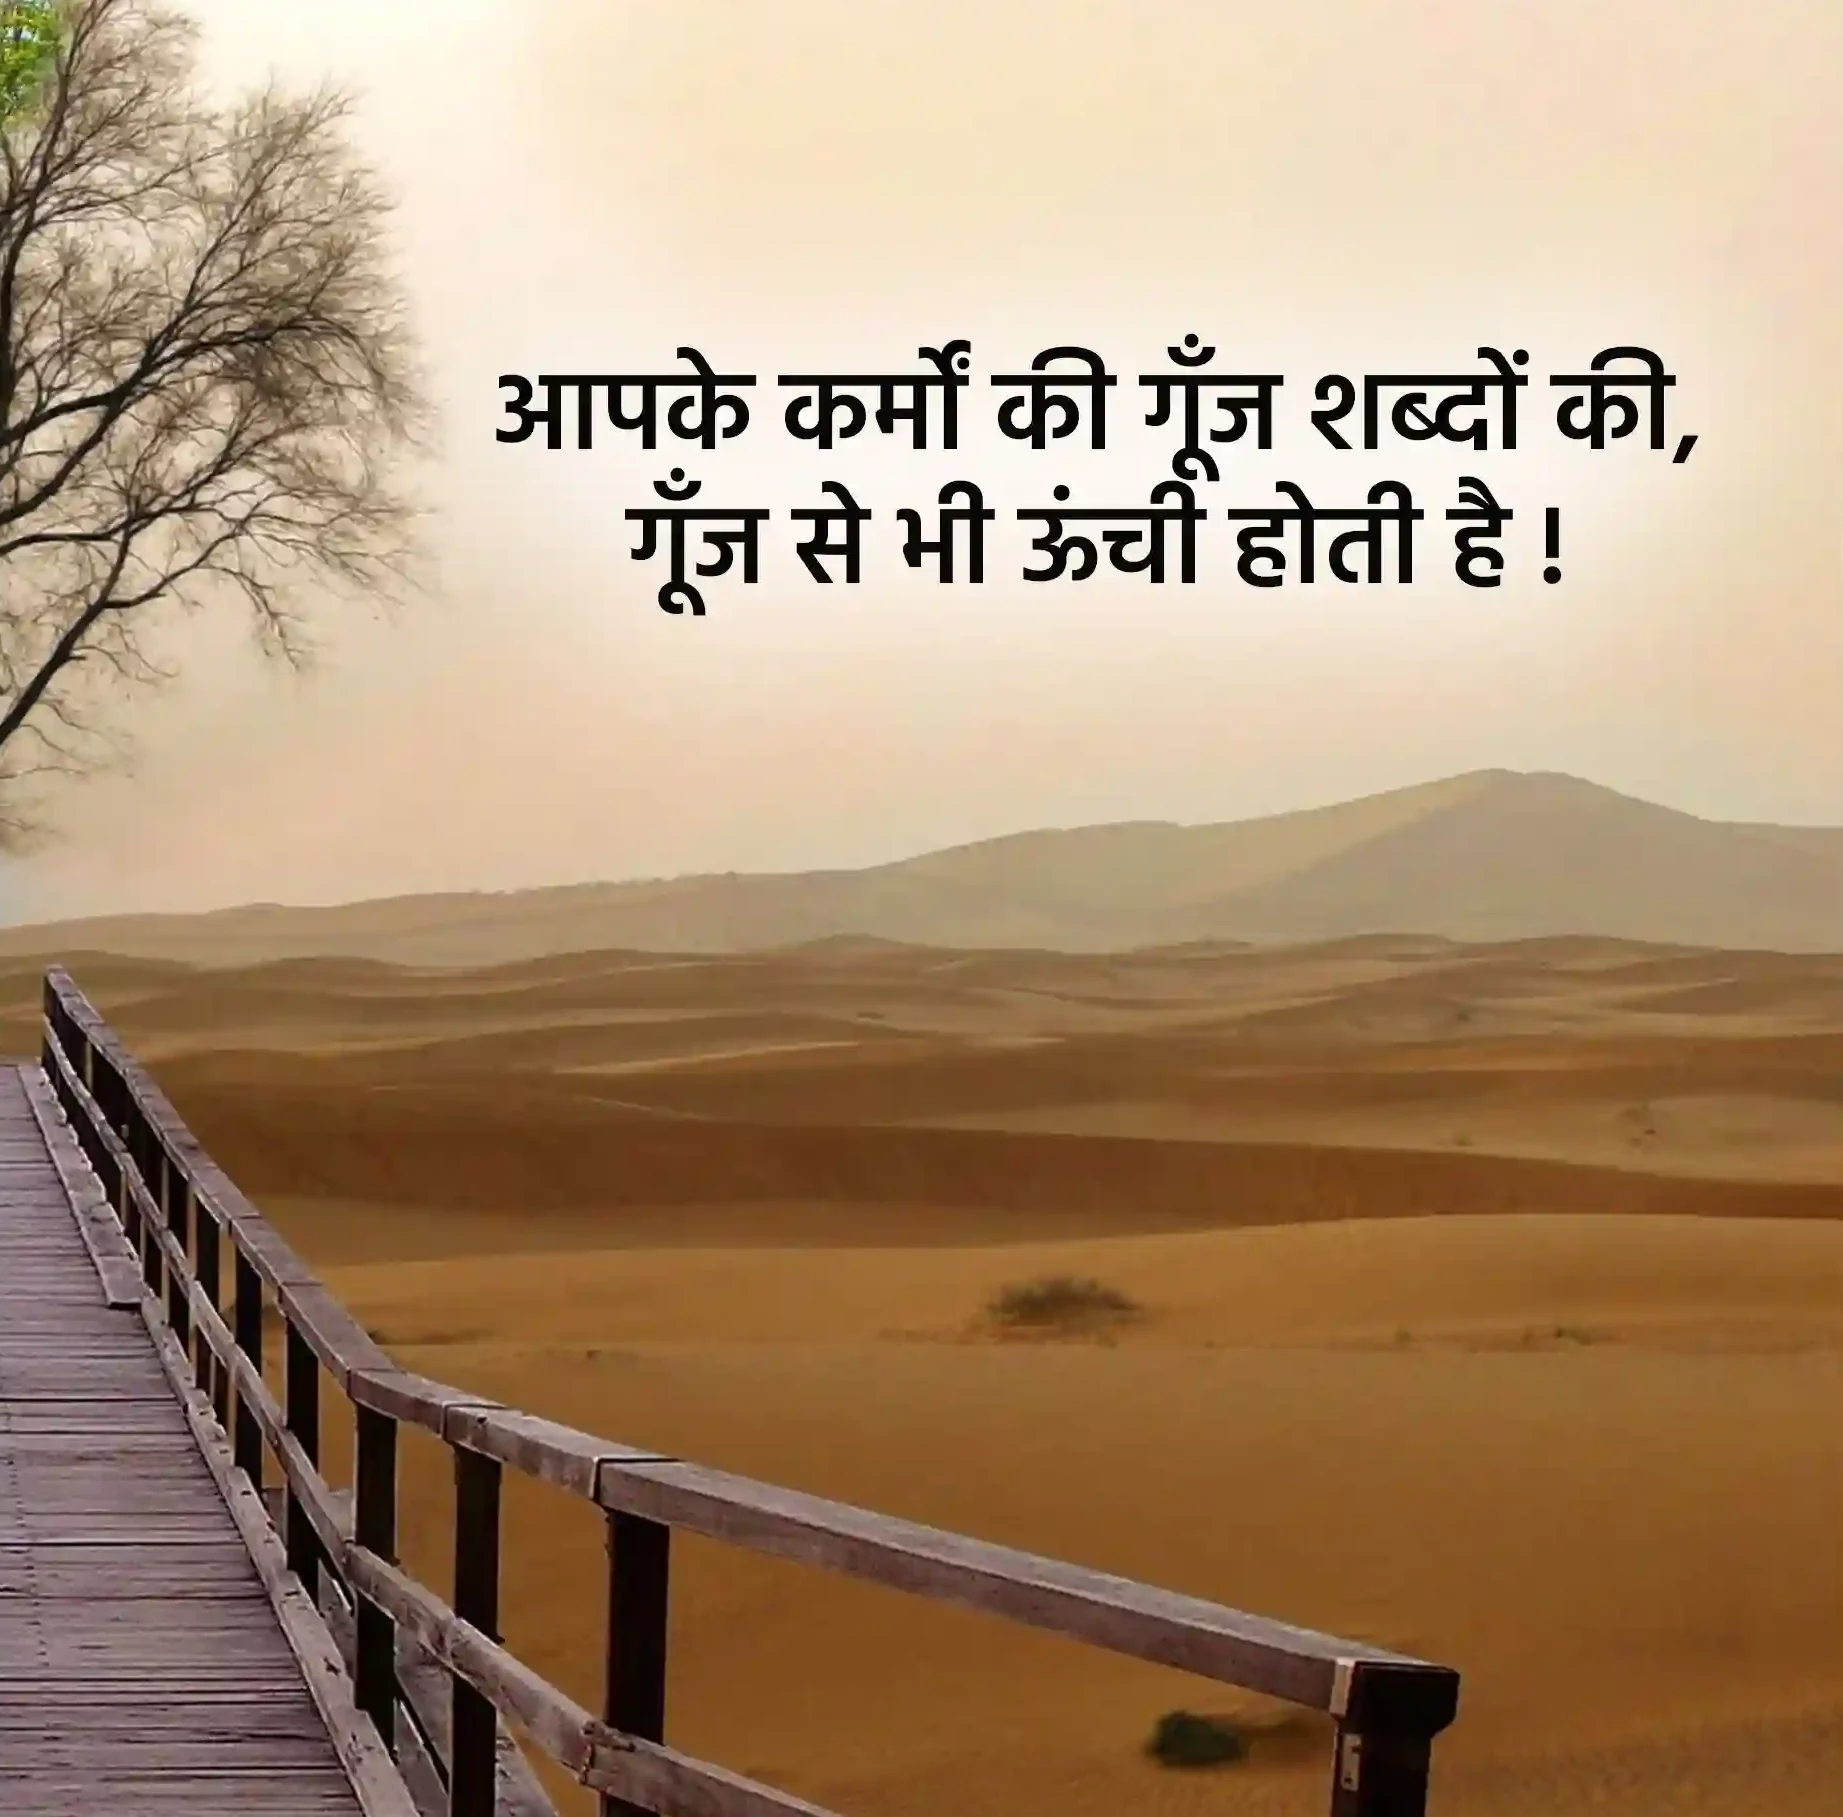 Best Karma Quotes in Hindi